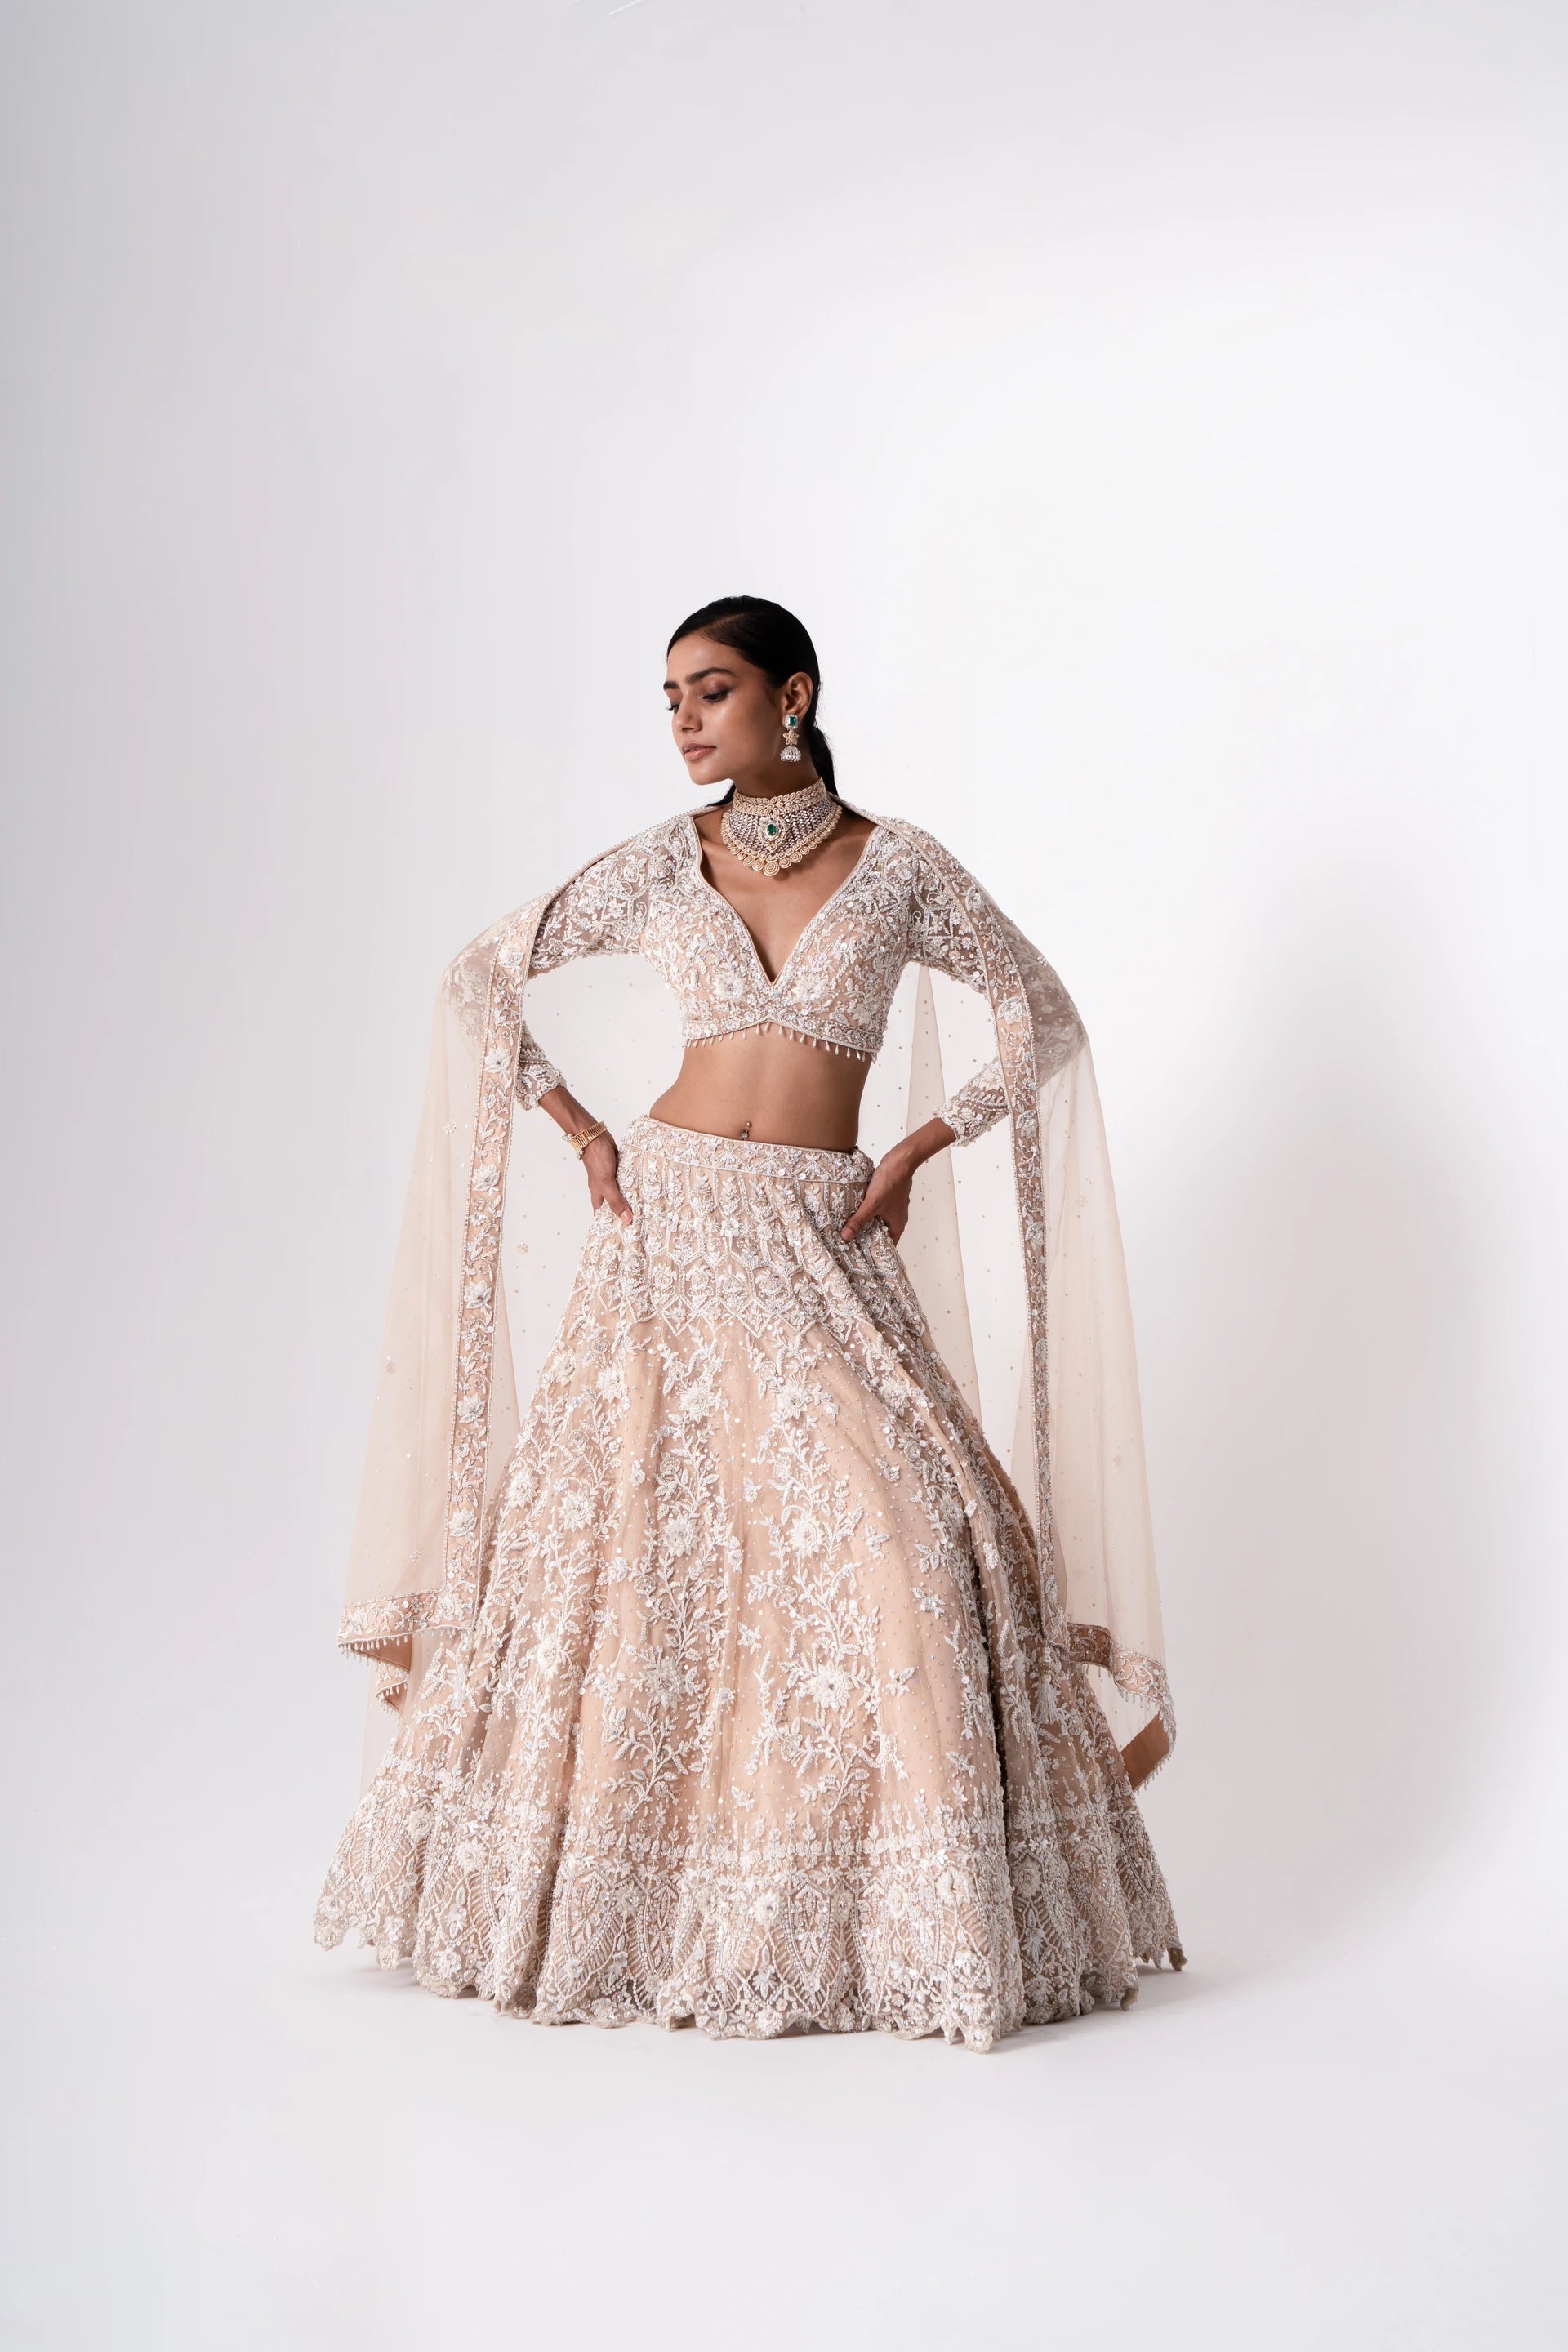 Wedding Outfit Designs & Bridal Styles Trending in 2020 - Witty Vows